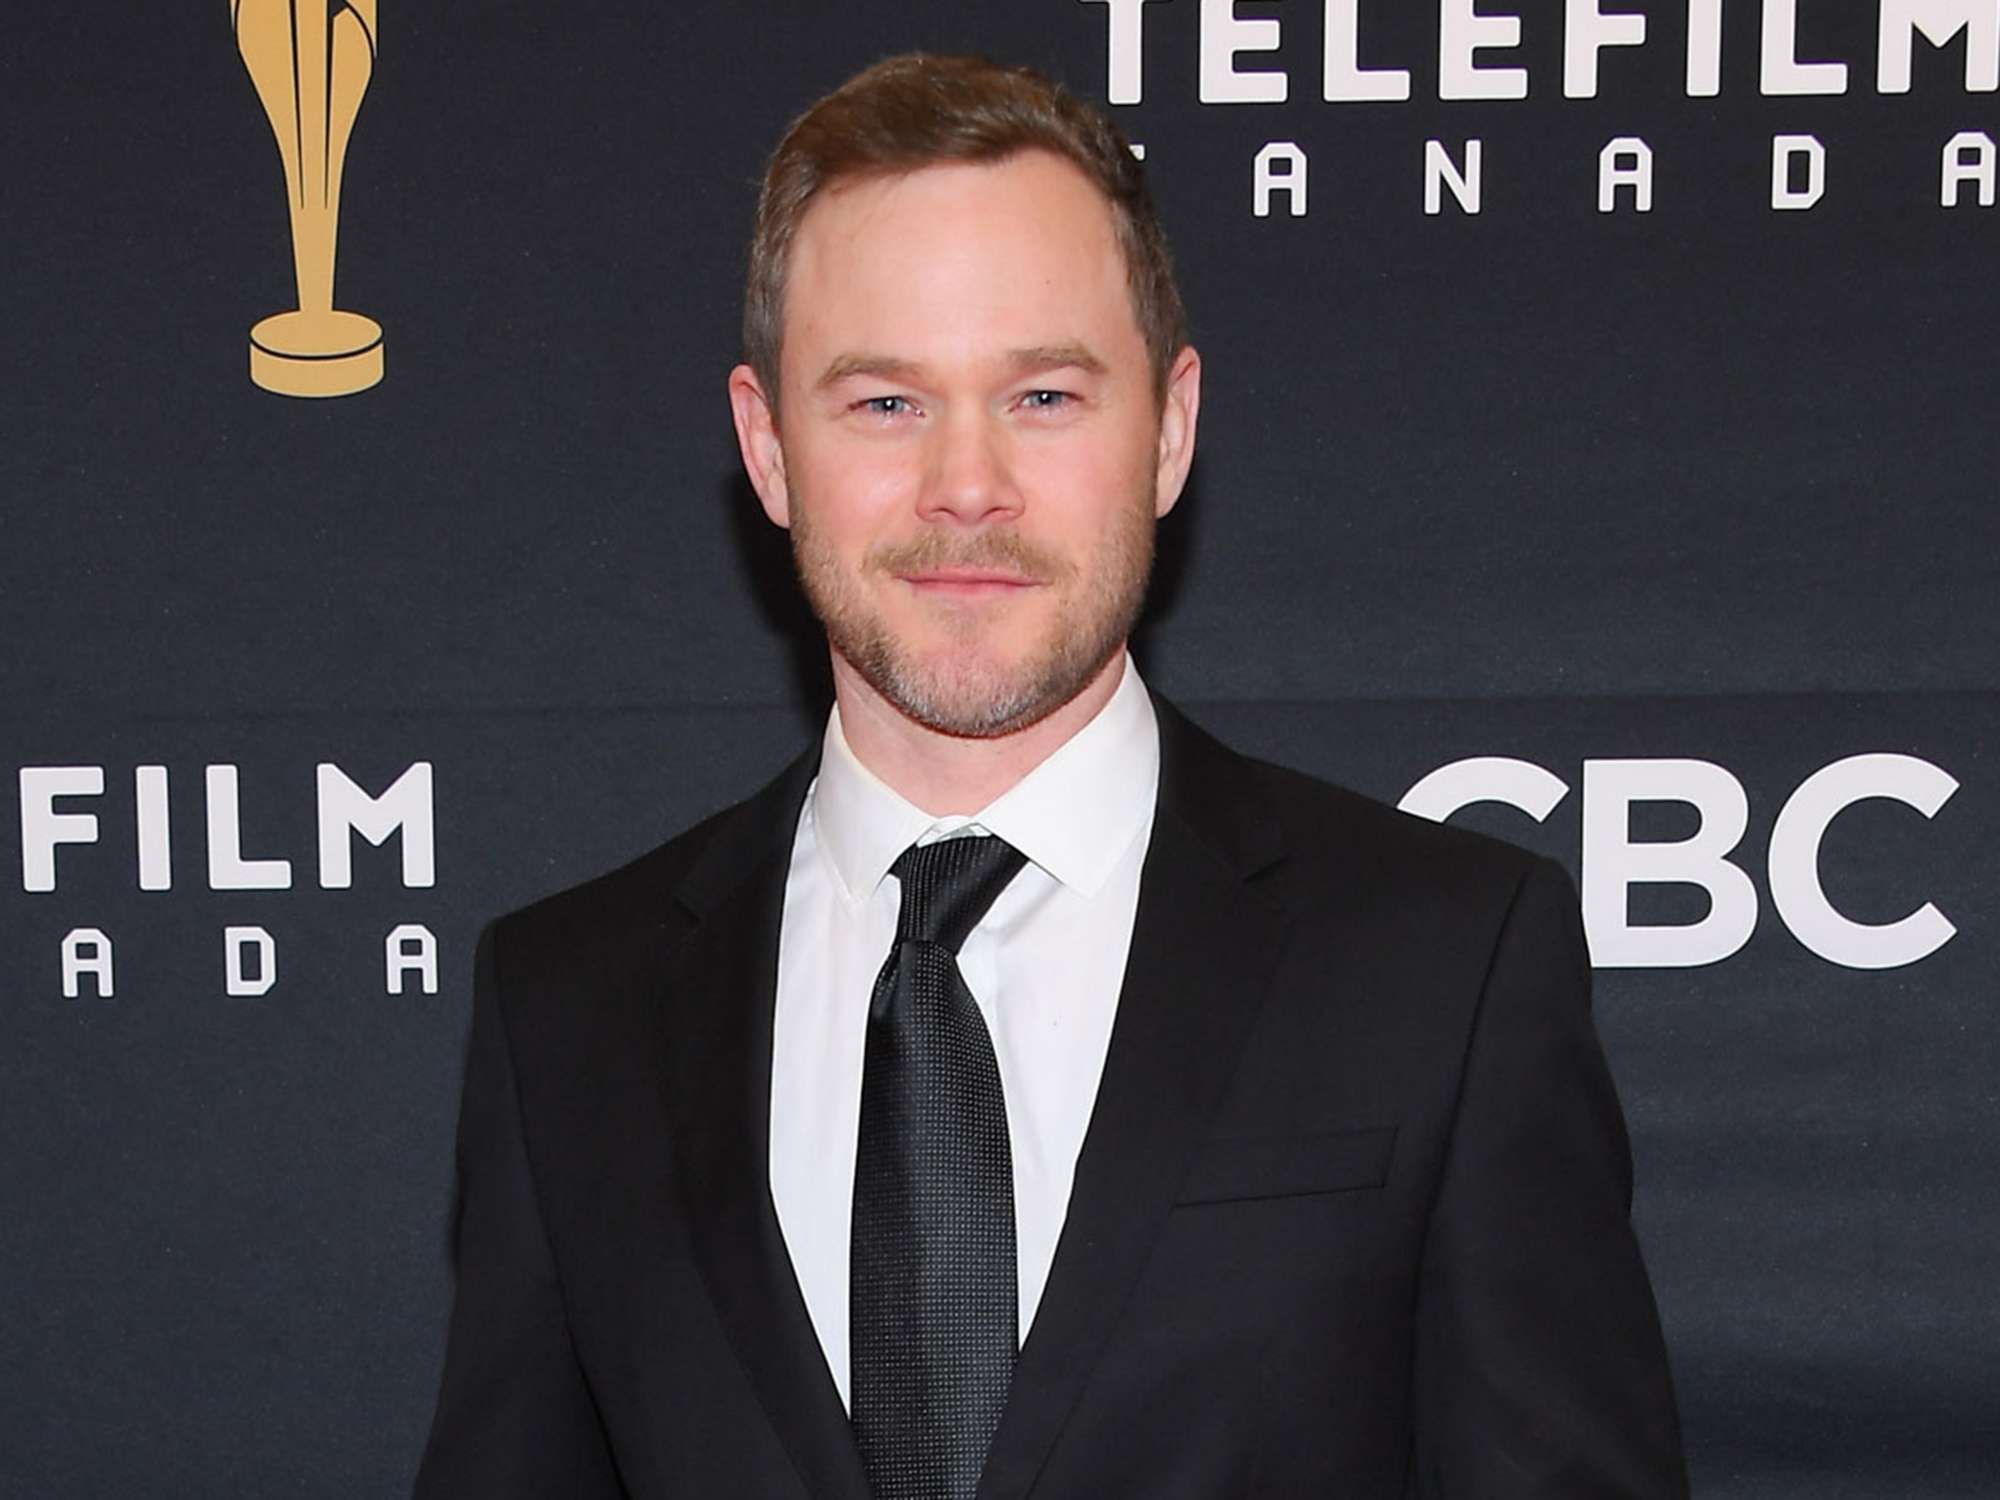 Aaron Ashmore attends the 2019 Canadian Screen Awards Broadcast Gala at Sony Centre for the Performing Arts on March 31, 2019 in Toronto, Canada.